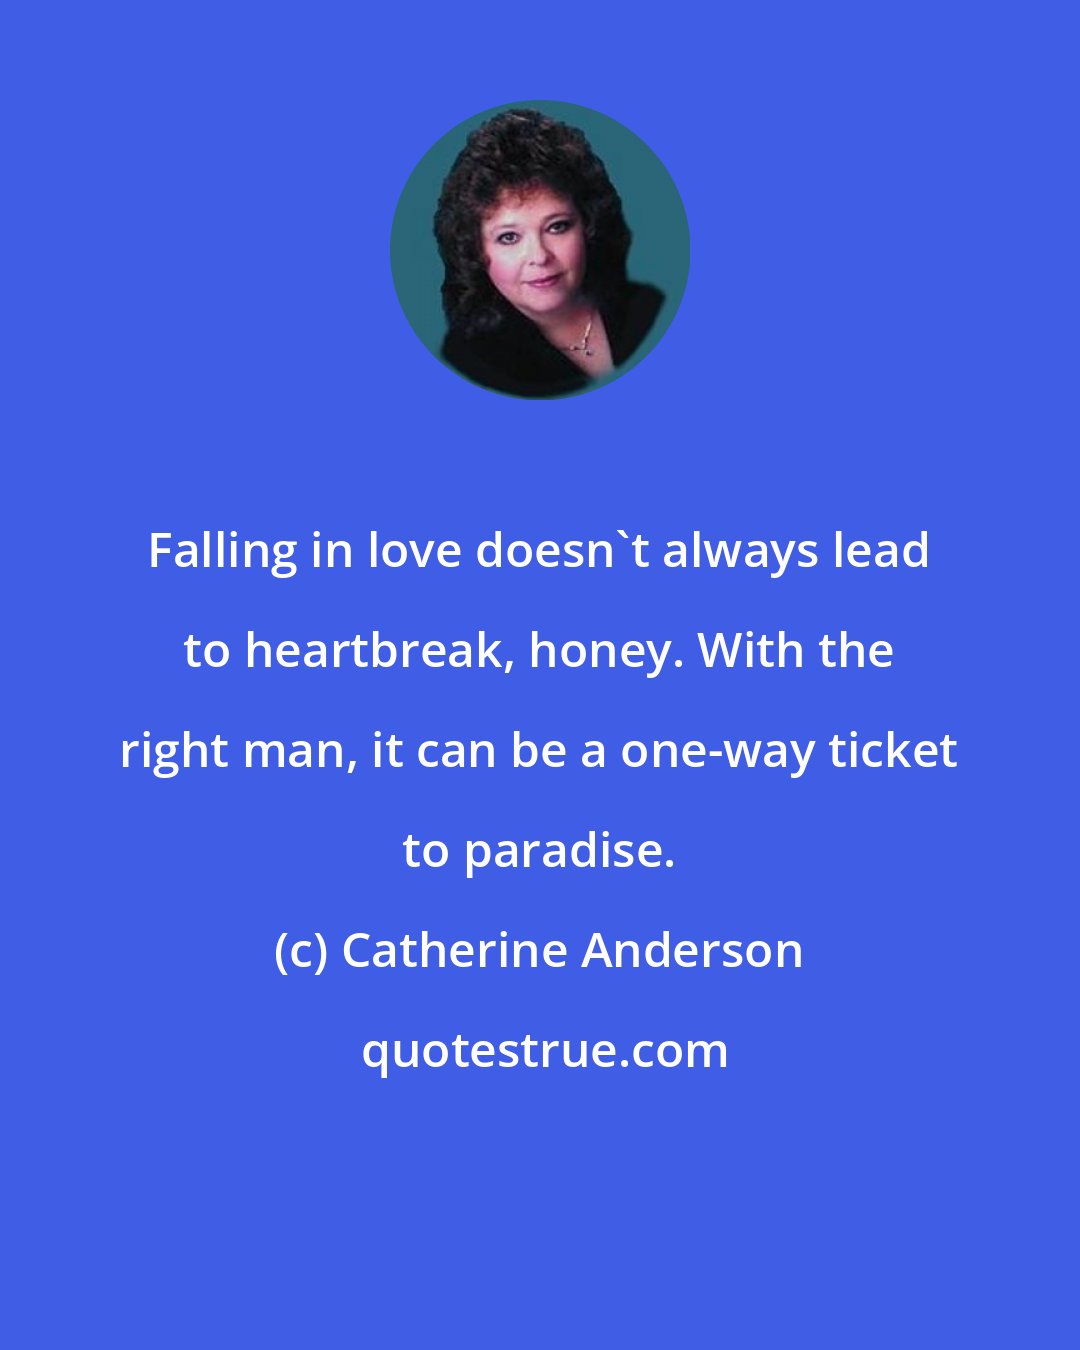 Catherine Anderson: Falling in love doesn't always lead to heartbreak, honey. With the right man, it can be a one-way ticket to paradise.